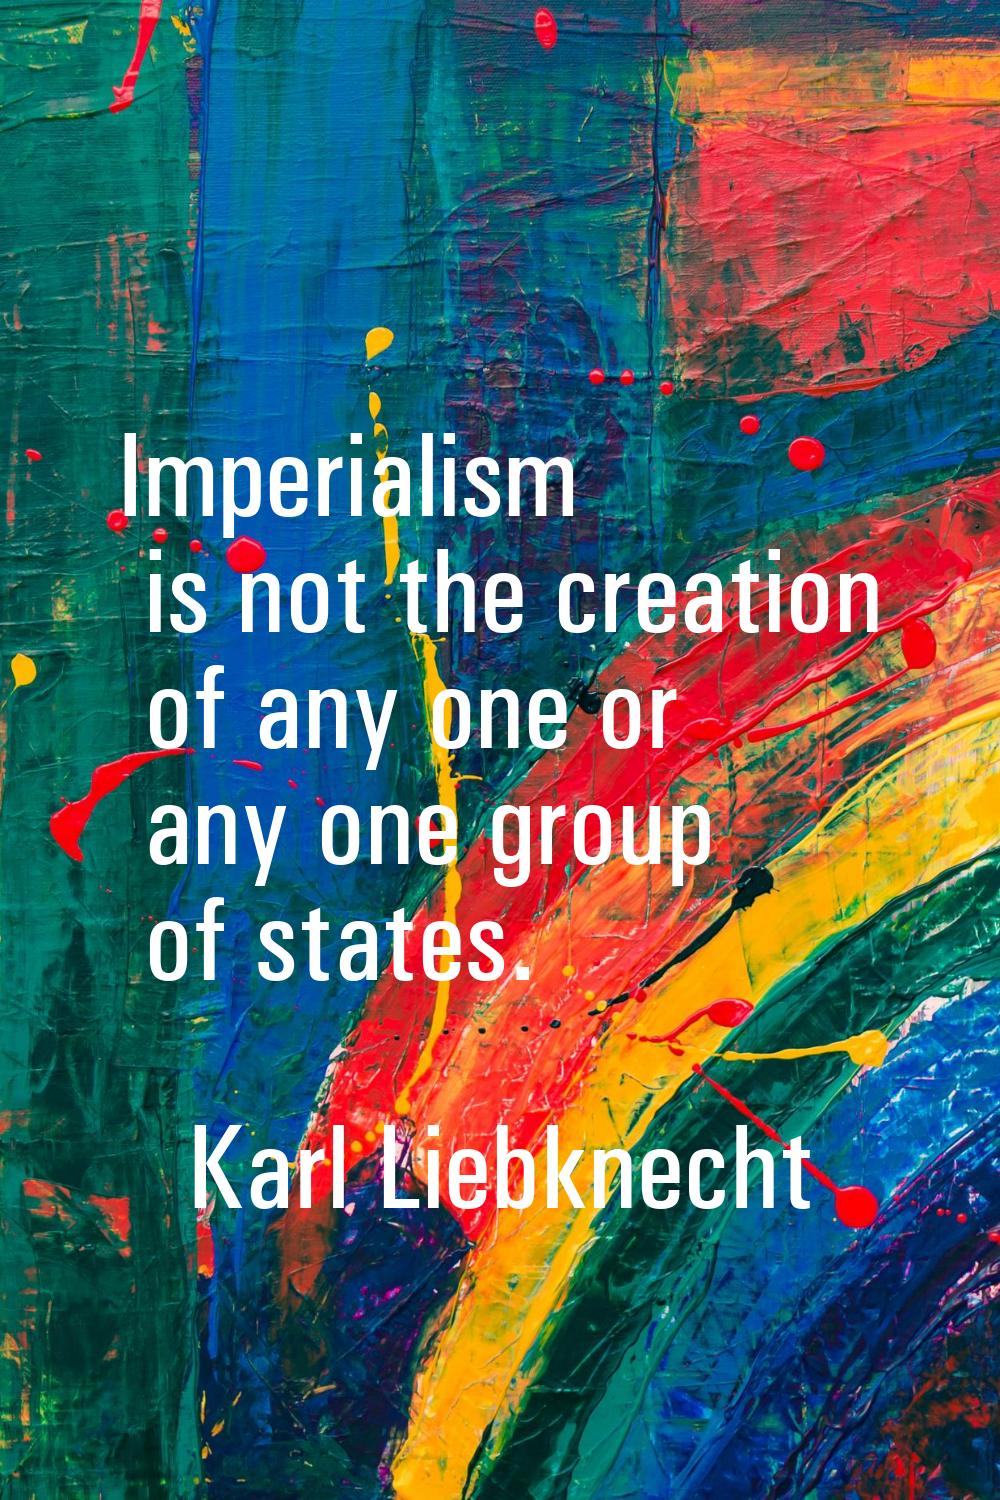 Imperialism is not the creation of any one or any one group of states.